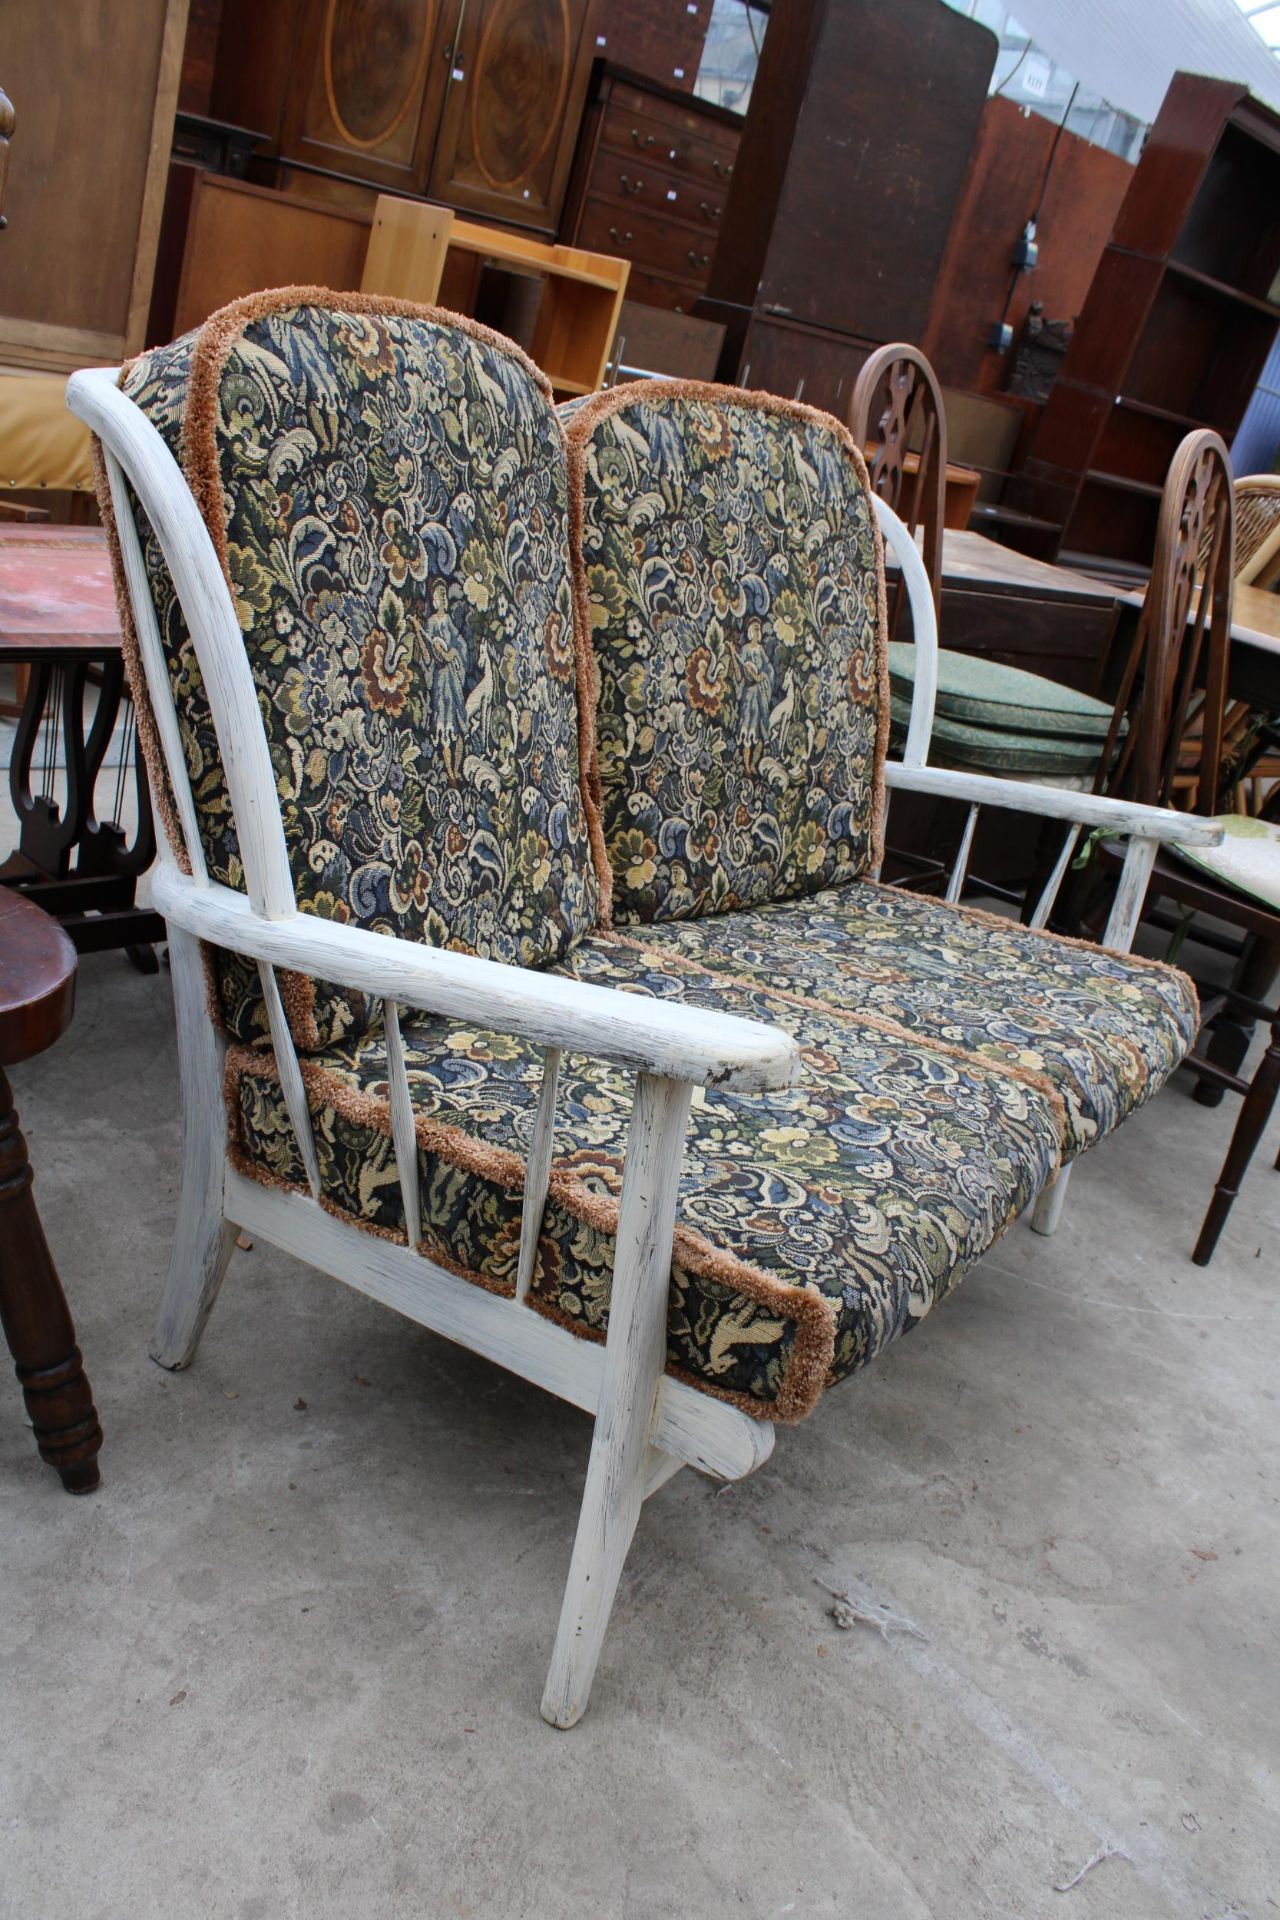 A SHABBY CHIC COTTAGE TWO SEATER SETTEE - Image 2 of 3